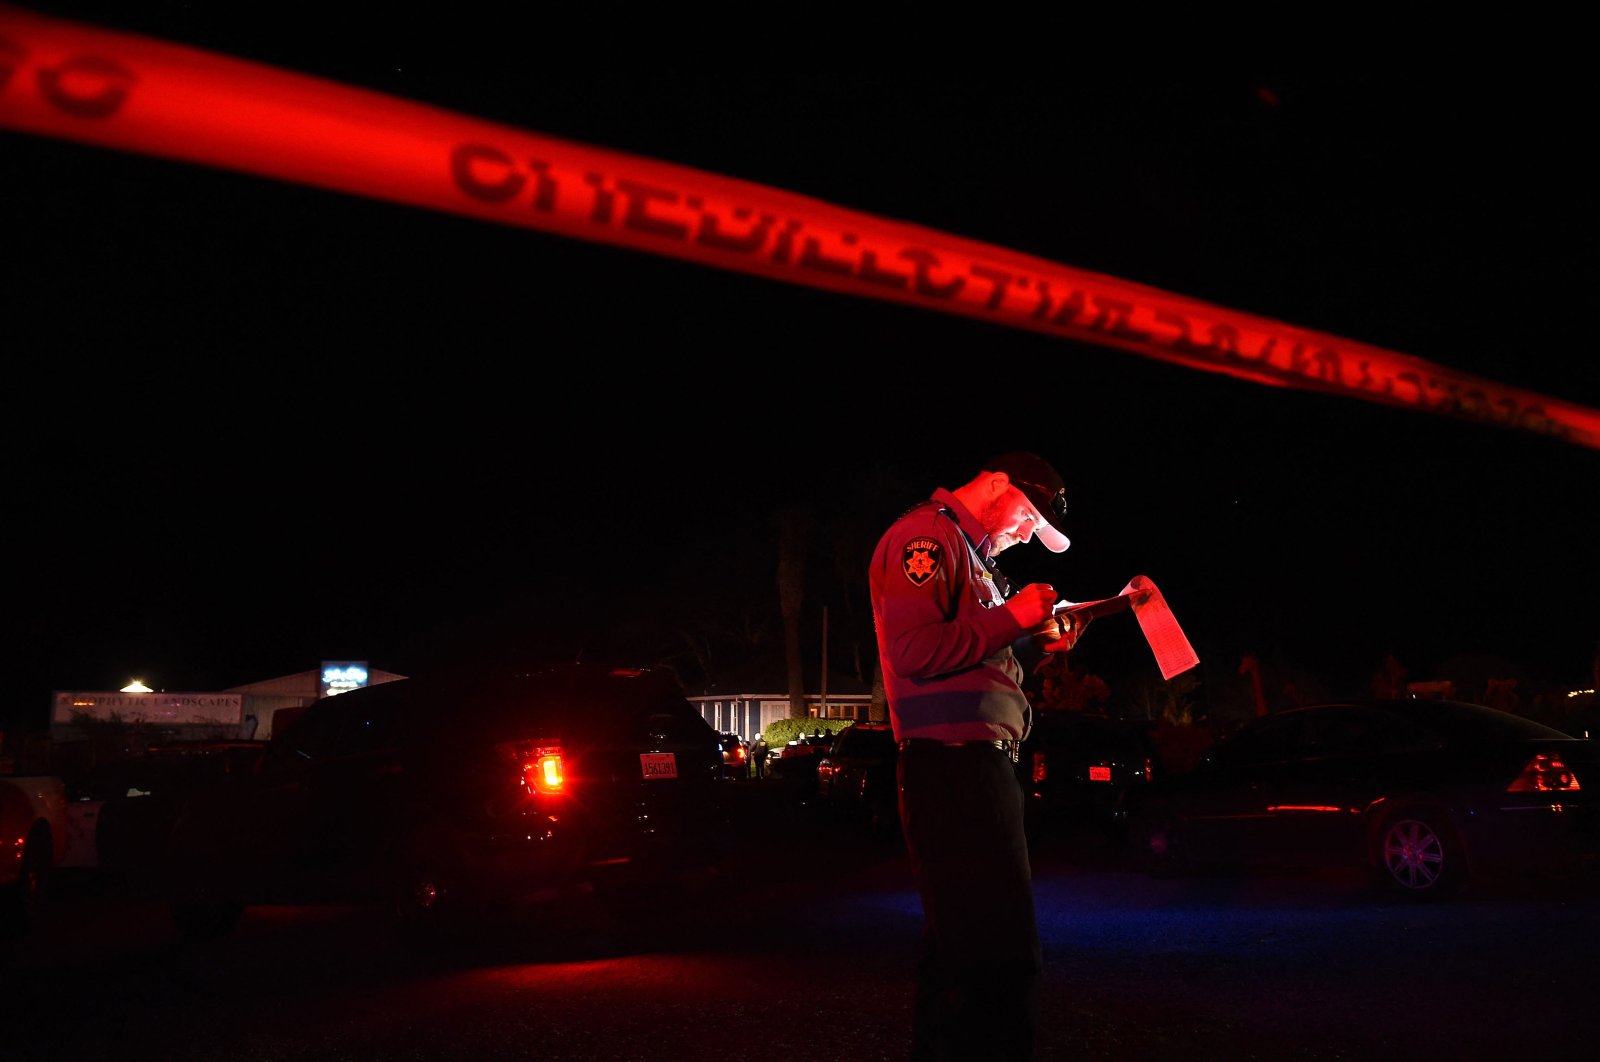 A San Mateo County sheriff deputy stands at the scene of a shooting on Highway 92 in Half Moon Bay, California, U.S., Jan. 23, 2023. (AFP Photo)